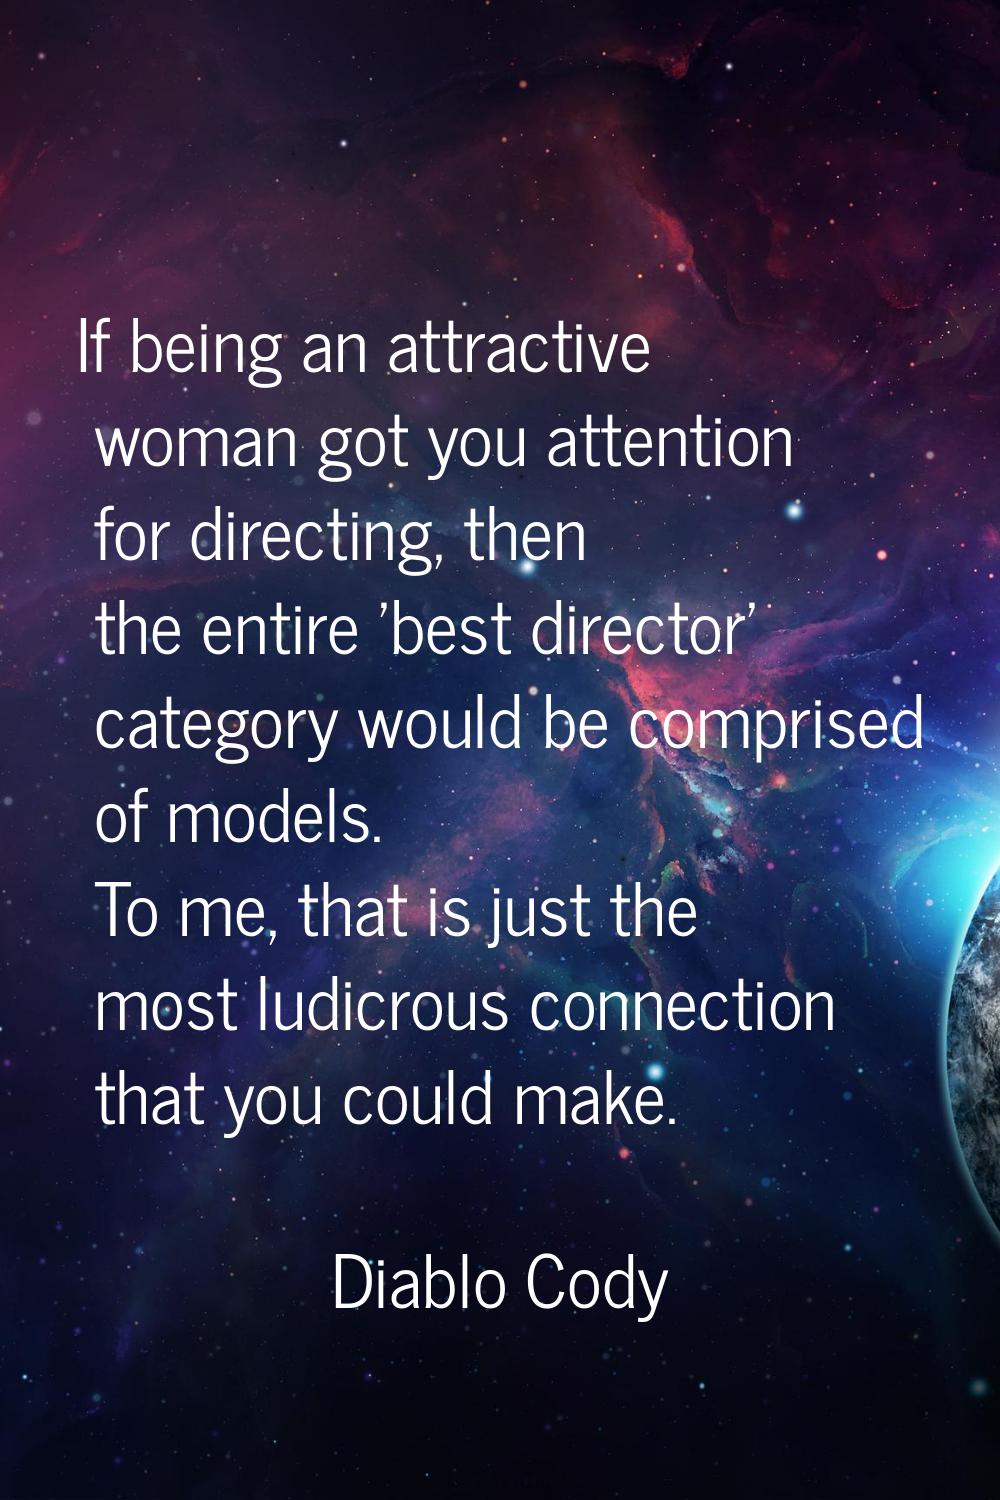 If being an attractive woman got you attention for directing, then the entire 'best director' categ